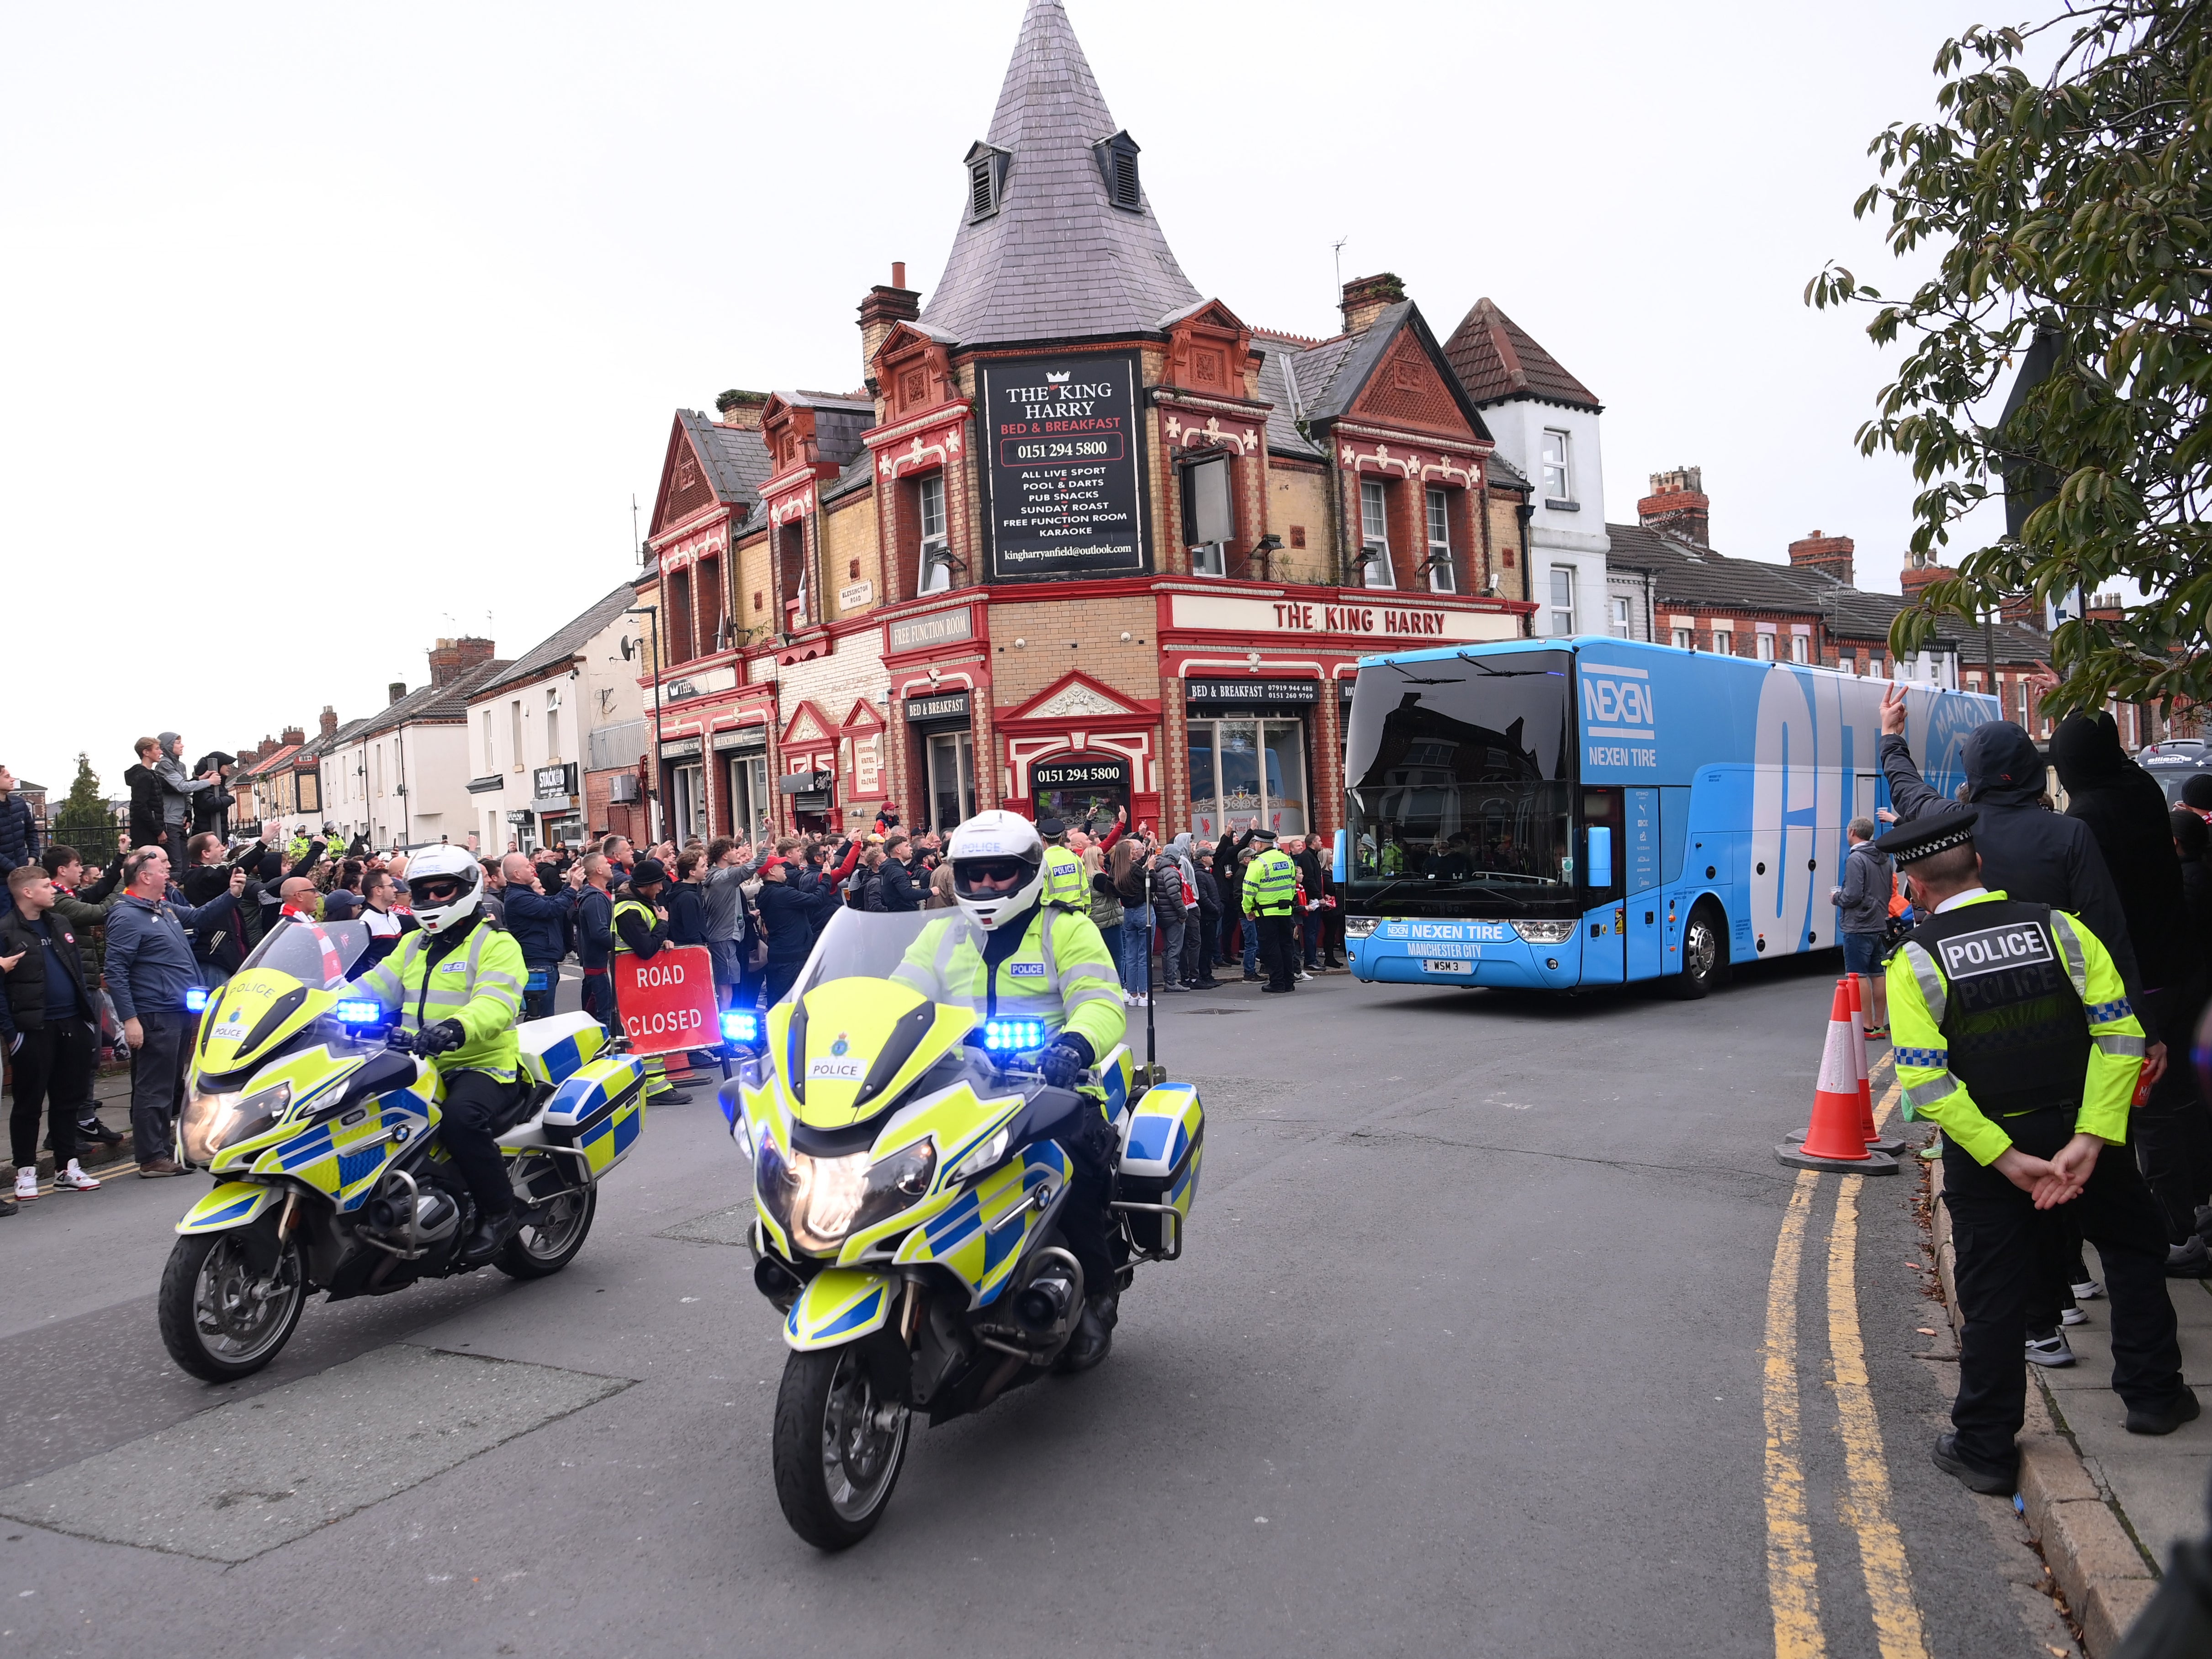 Manchester City’s bus arriving at Anfield for Sunday’s Premier League meeting